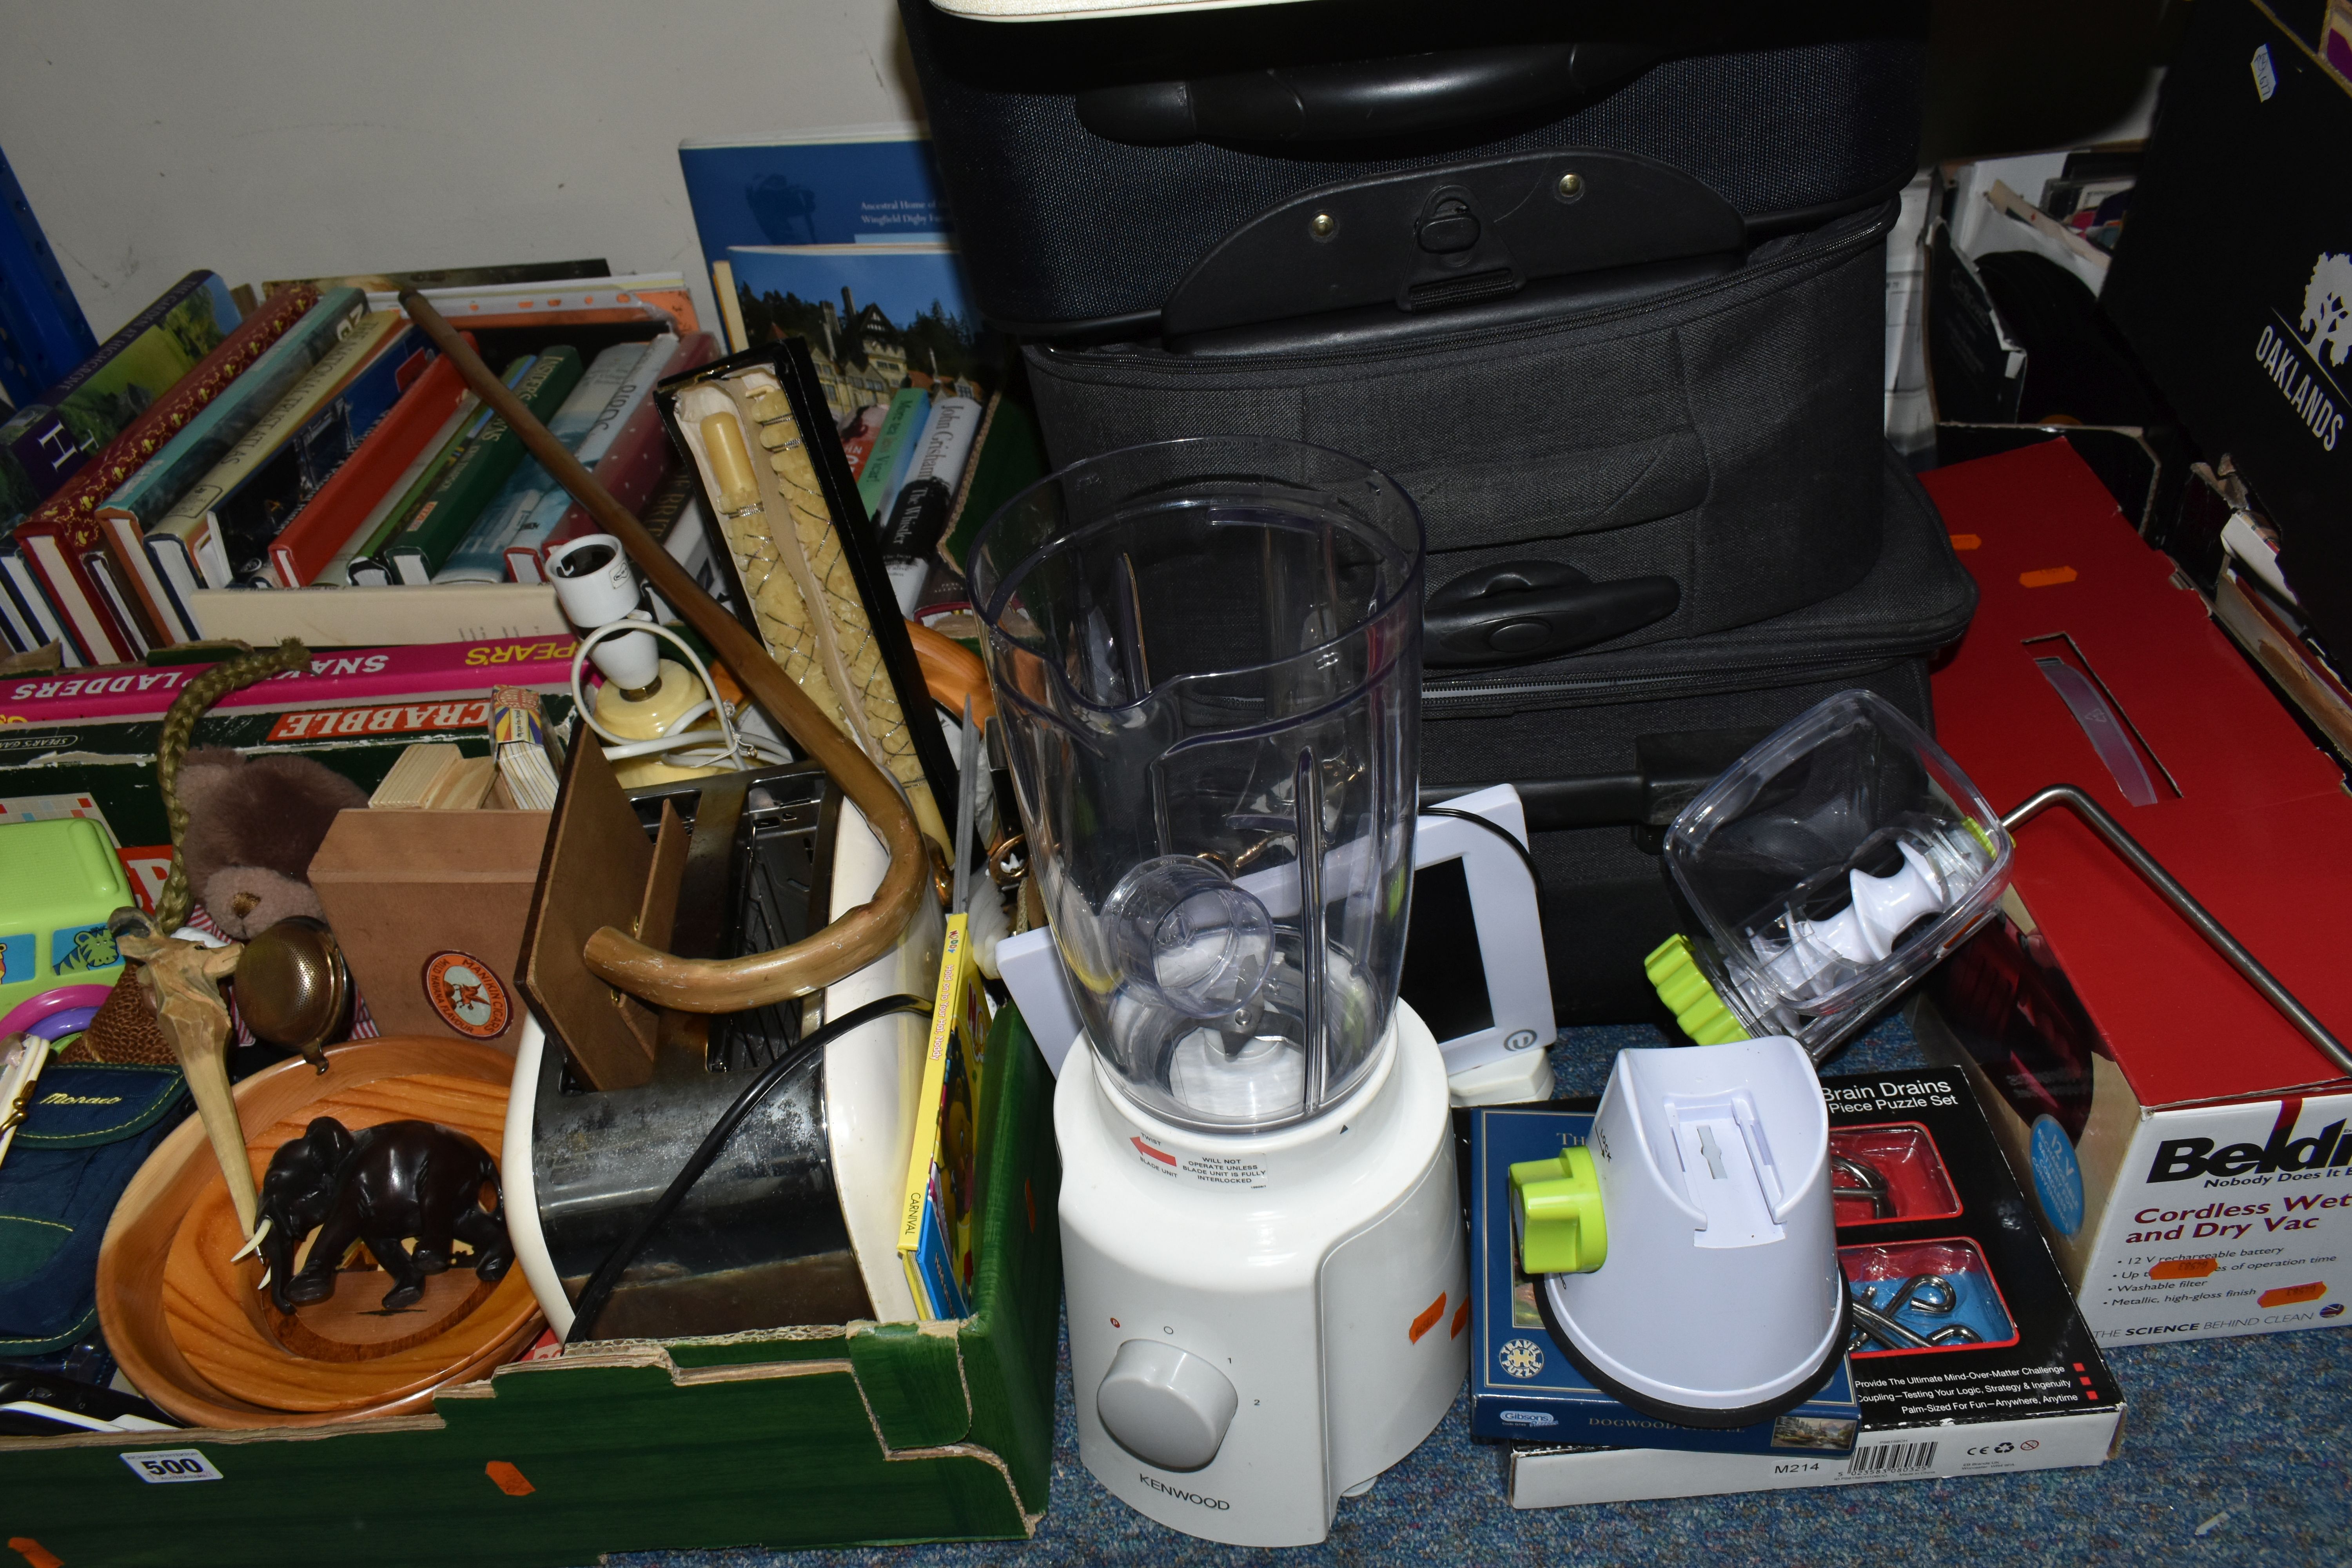 TWO BOXES OF MISCELLANEOUS SUNDRIES, to include four suitcases, a Kenwood blender, a boxed Beldray